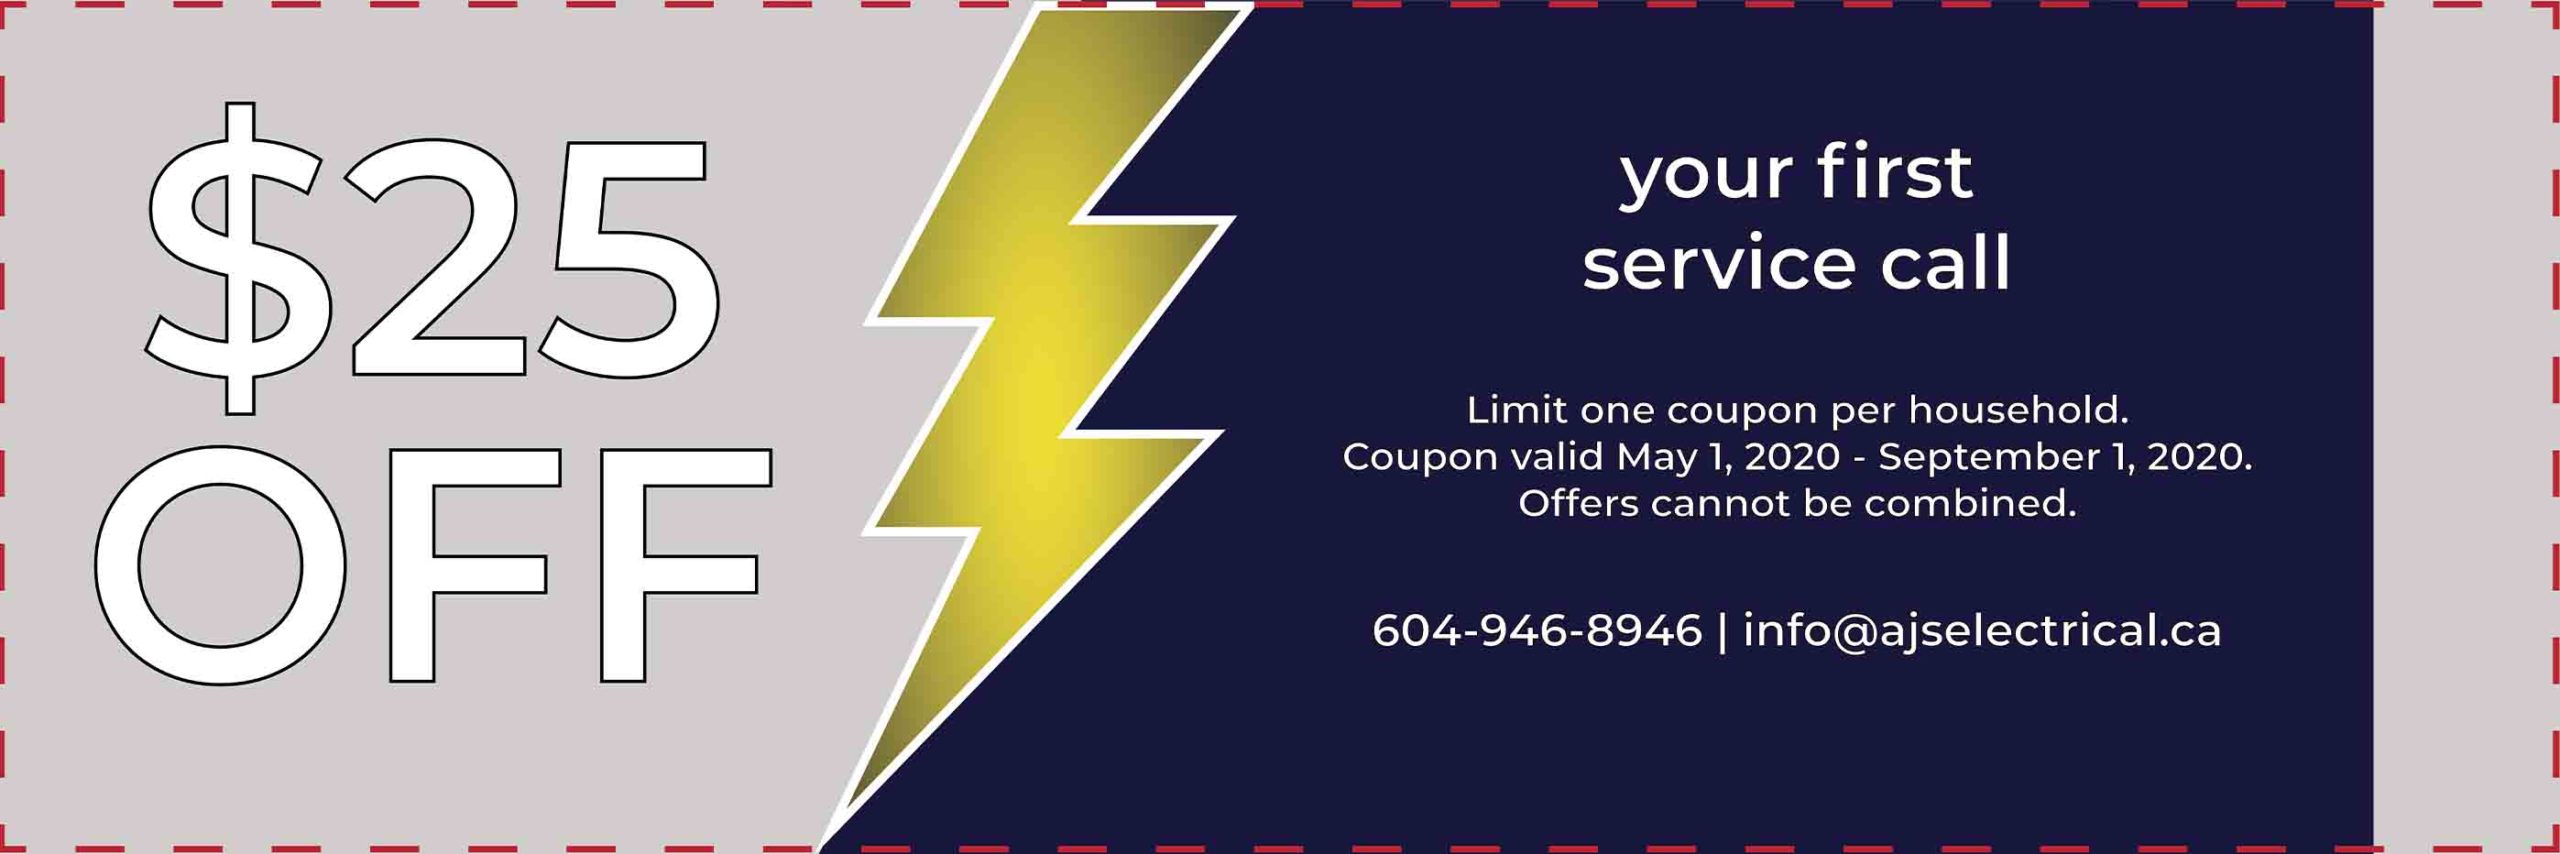 $25 off - AJs Electrical